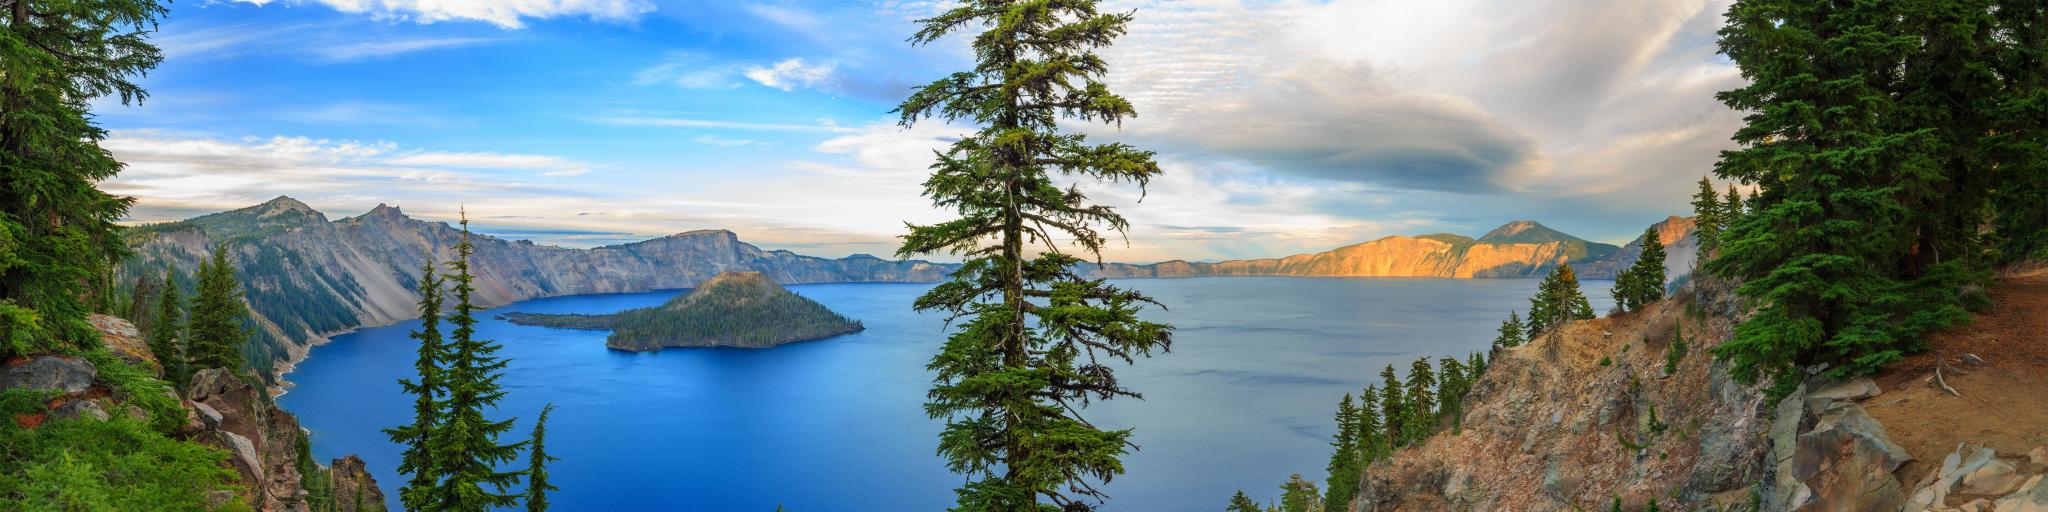 View of Crater Lake, Oregon, with trees in the foreground.